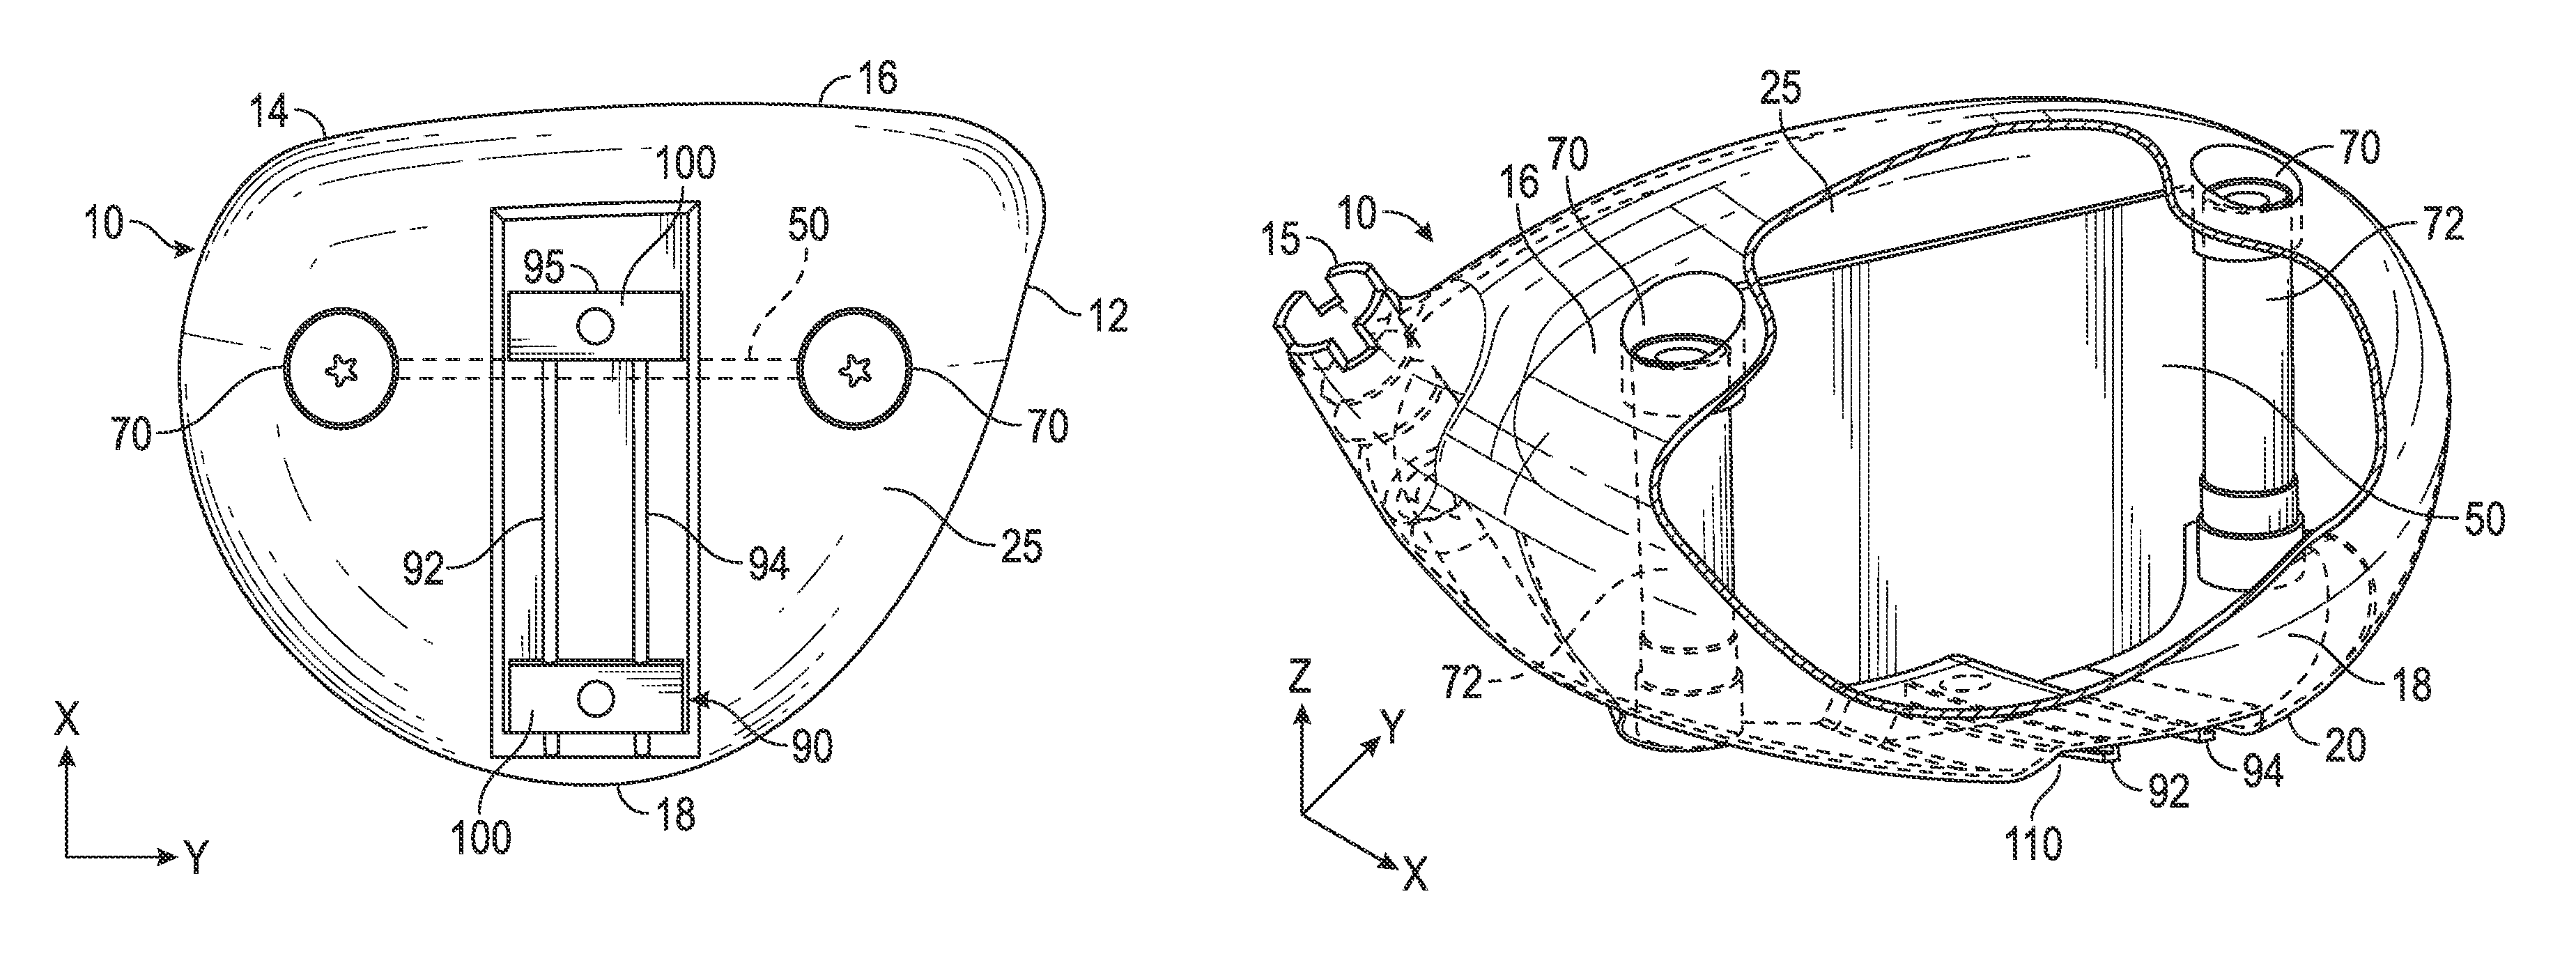 Golf club head with adjustable center of gravity